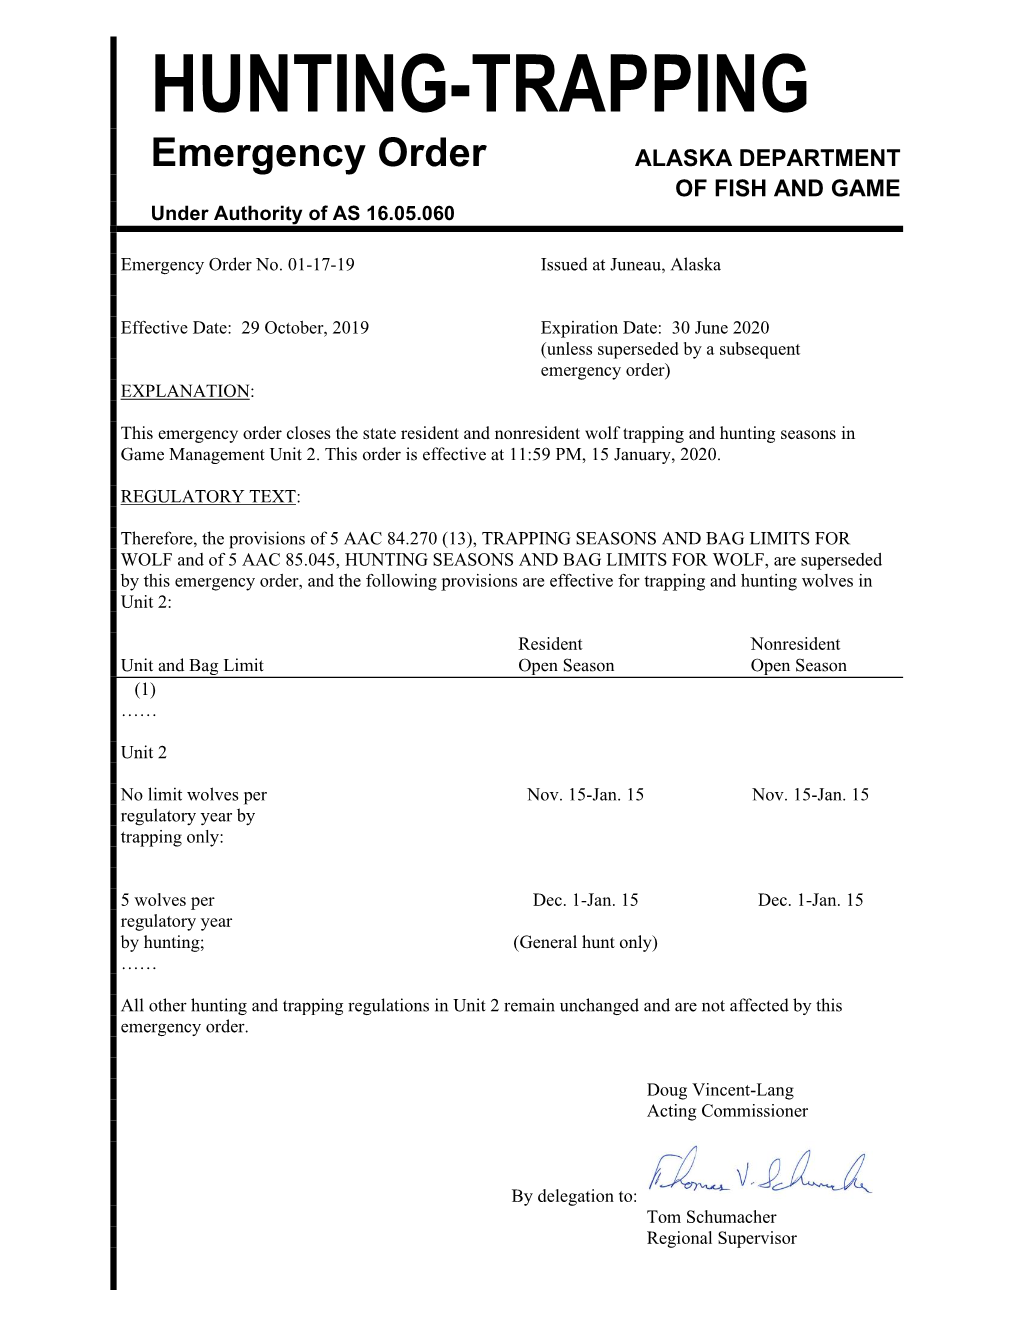 HUNTING-TRAPPING Emergency Order ALASKA DEPARTMENT of FISH and GAME Under Authority of AS 16.05.060